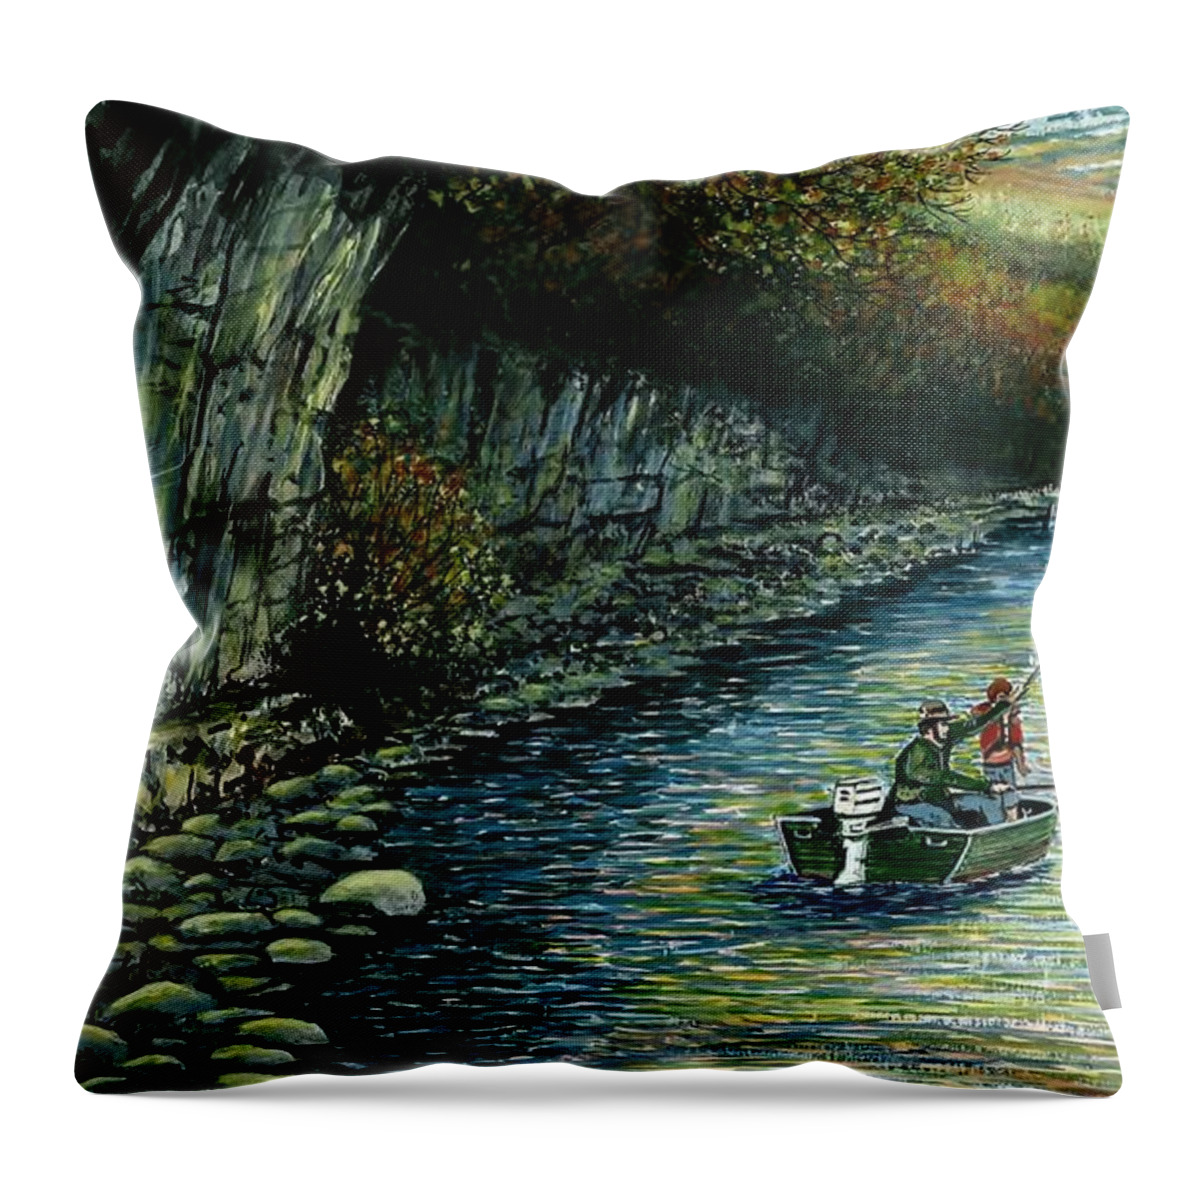 Fishing Buddies Throw Pillow featuring the painting Fishing Buddies #1 by Steven Schultz